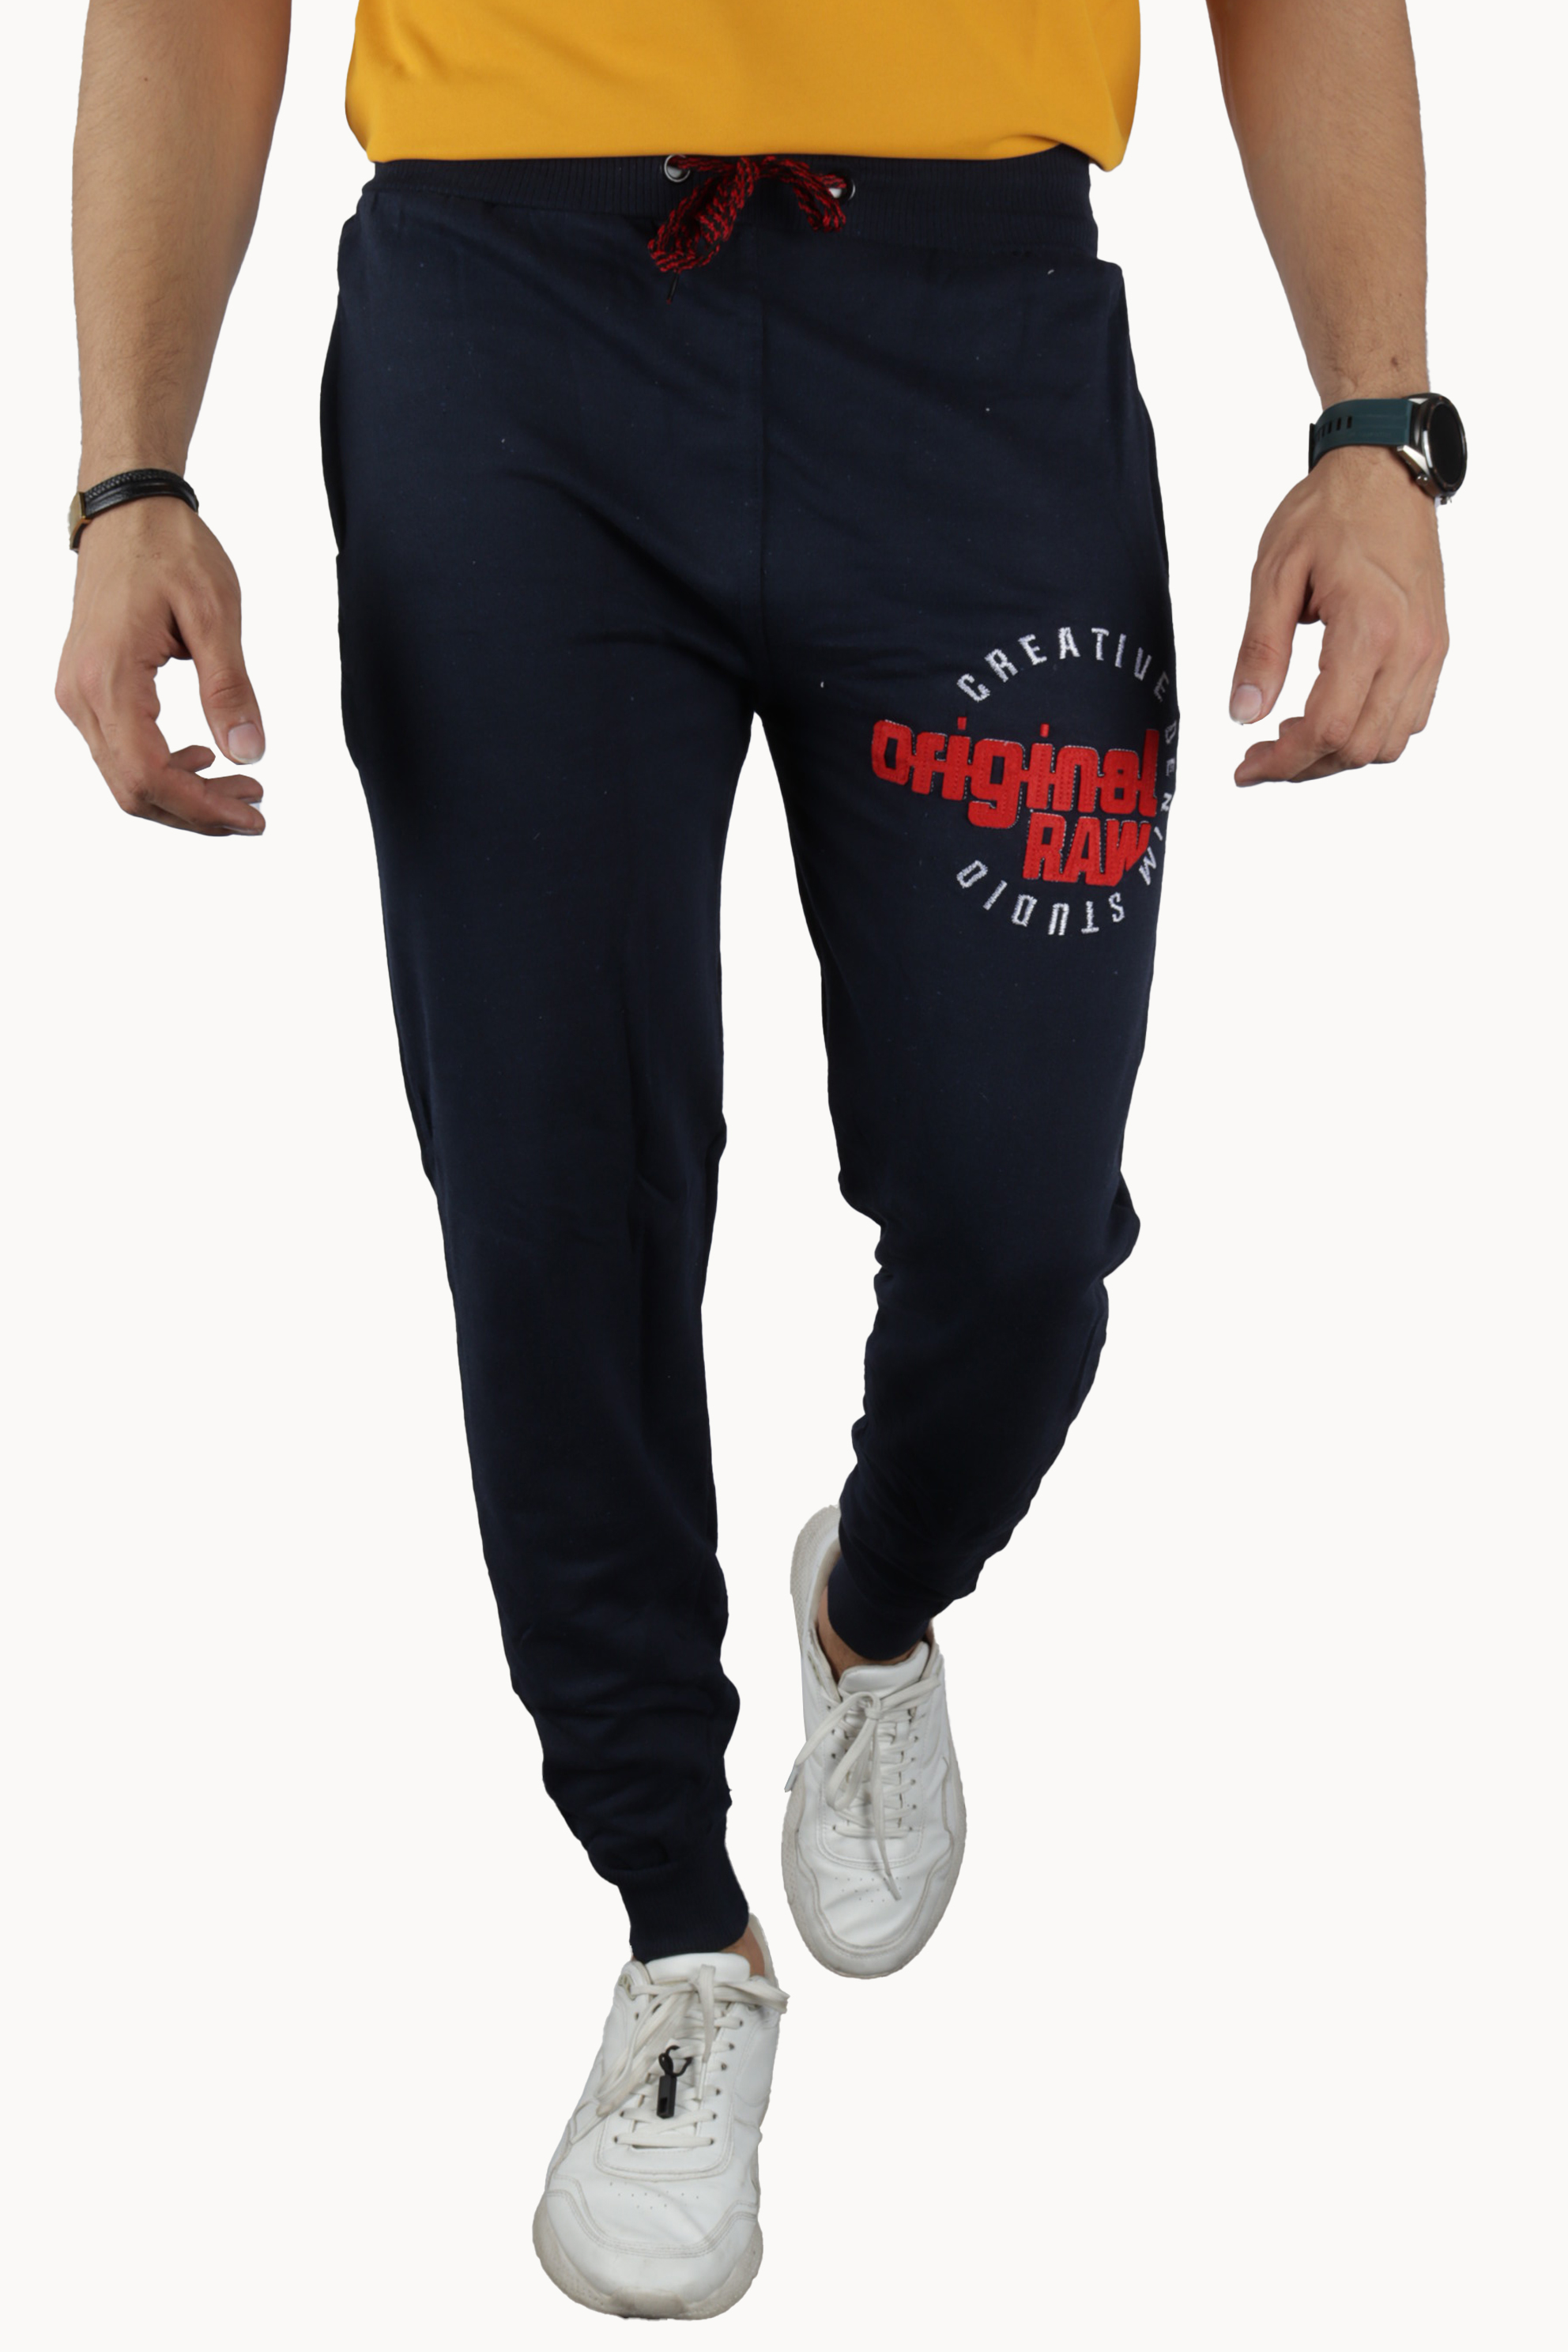 Minora Joggers for Men Athletic Men's Track Pants Workout Cotton Closed Bottom